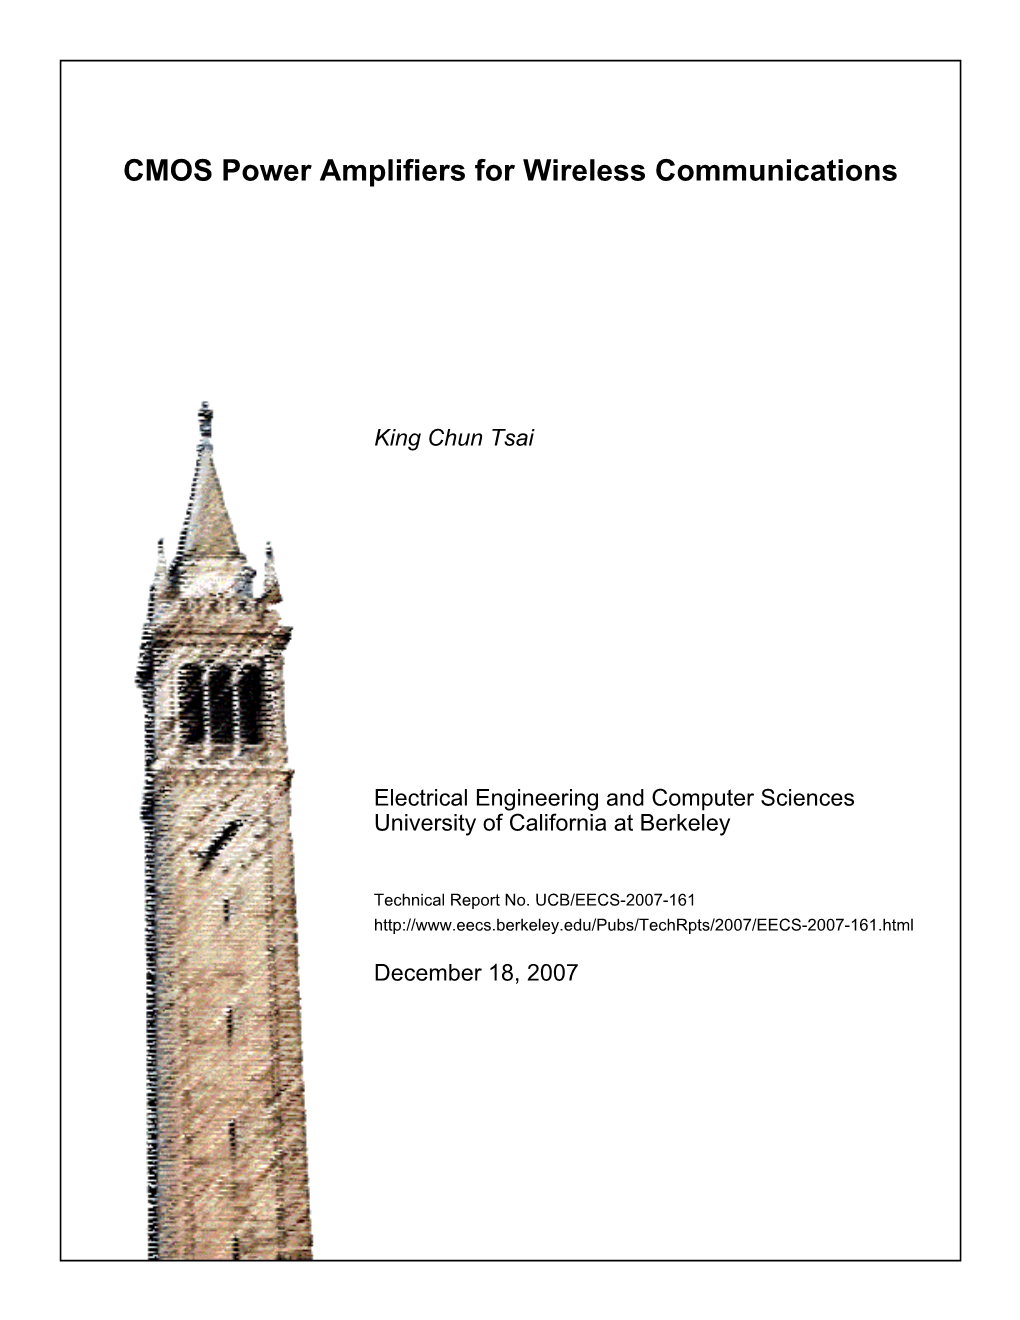 CMOS Power Amplifiers for Wireless Communications